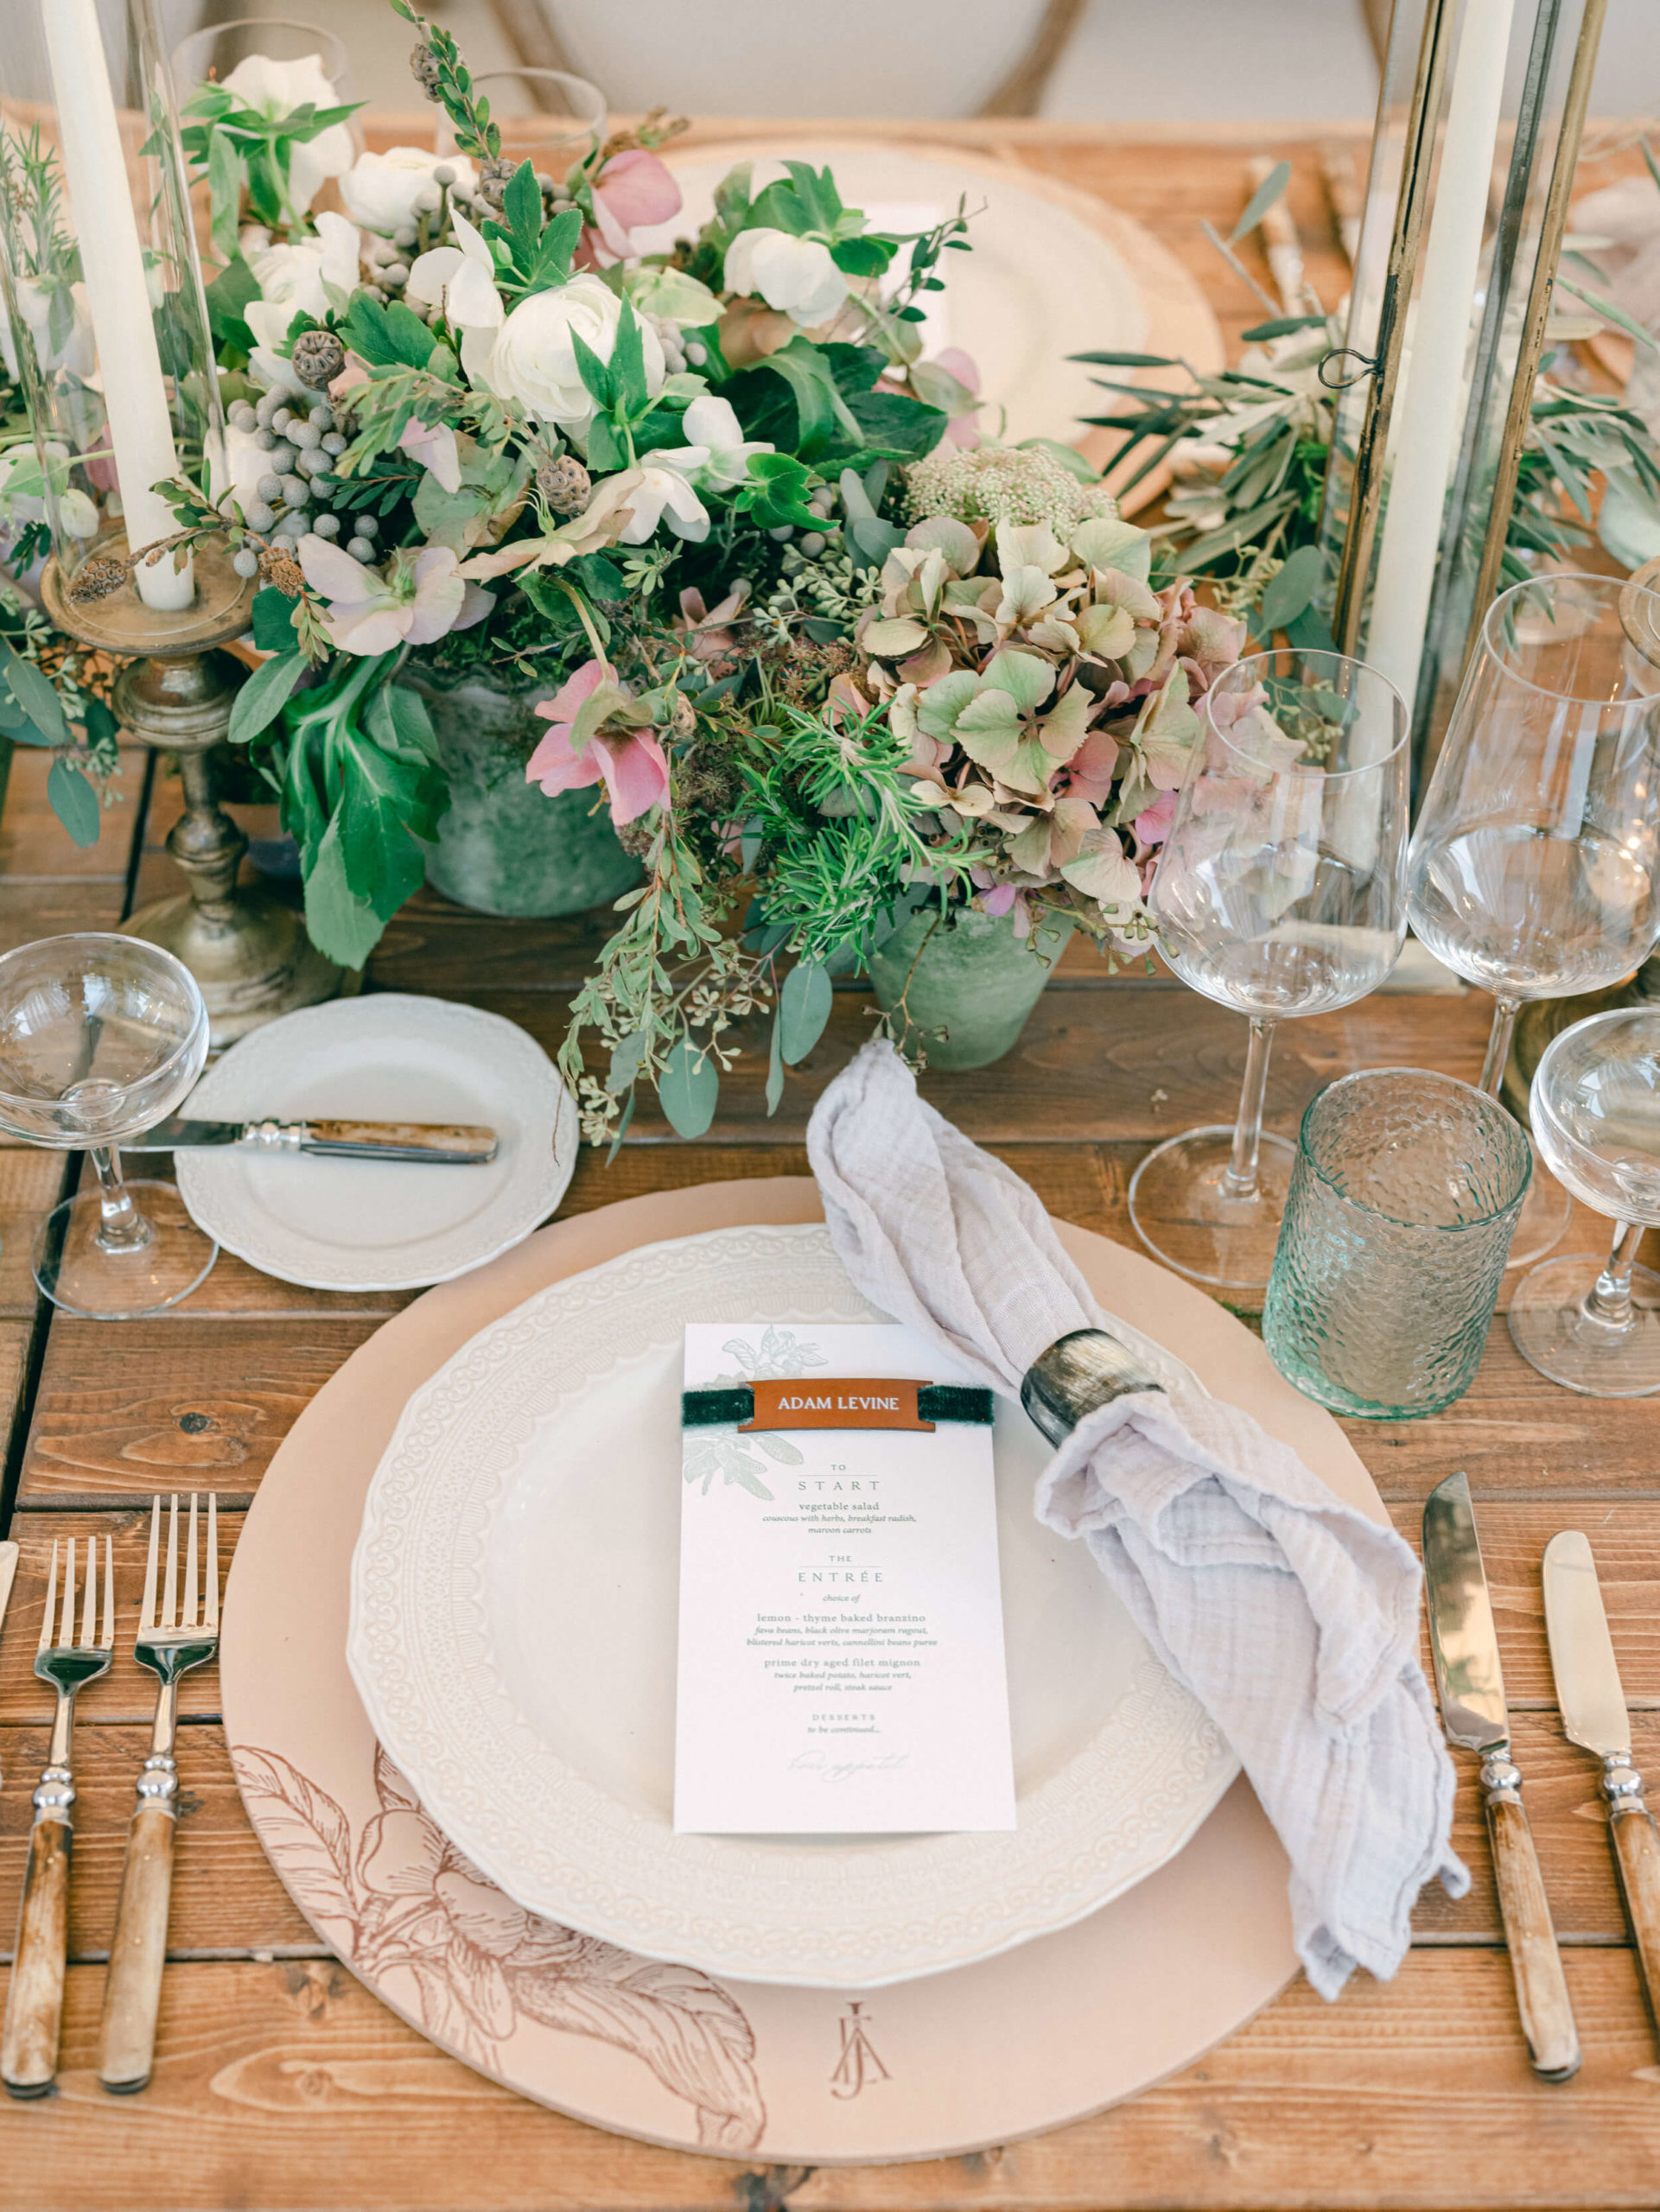 formal dinner place setting with floral arrangements